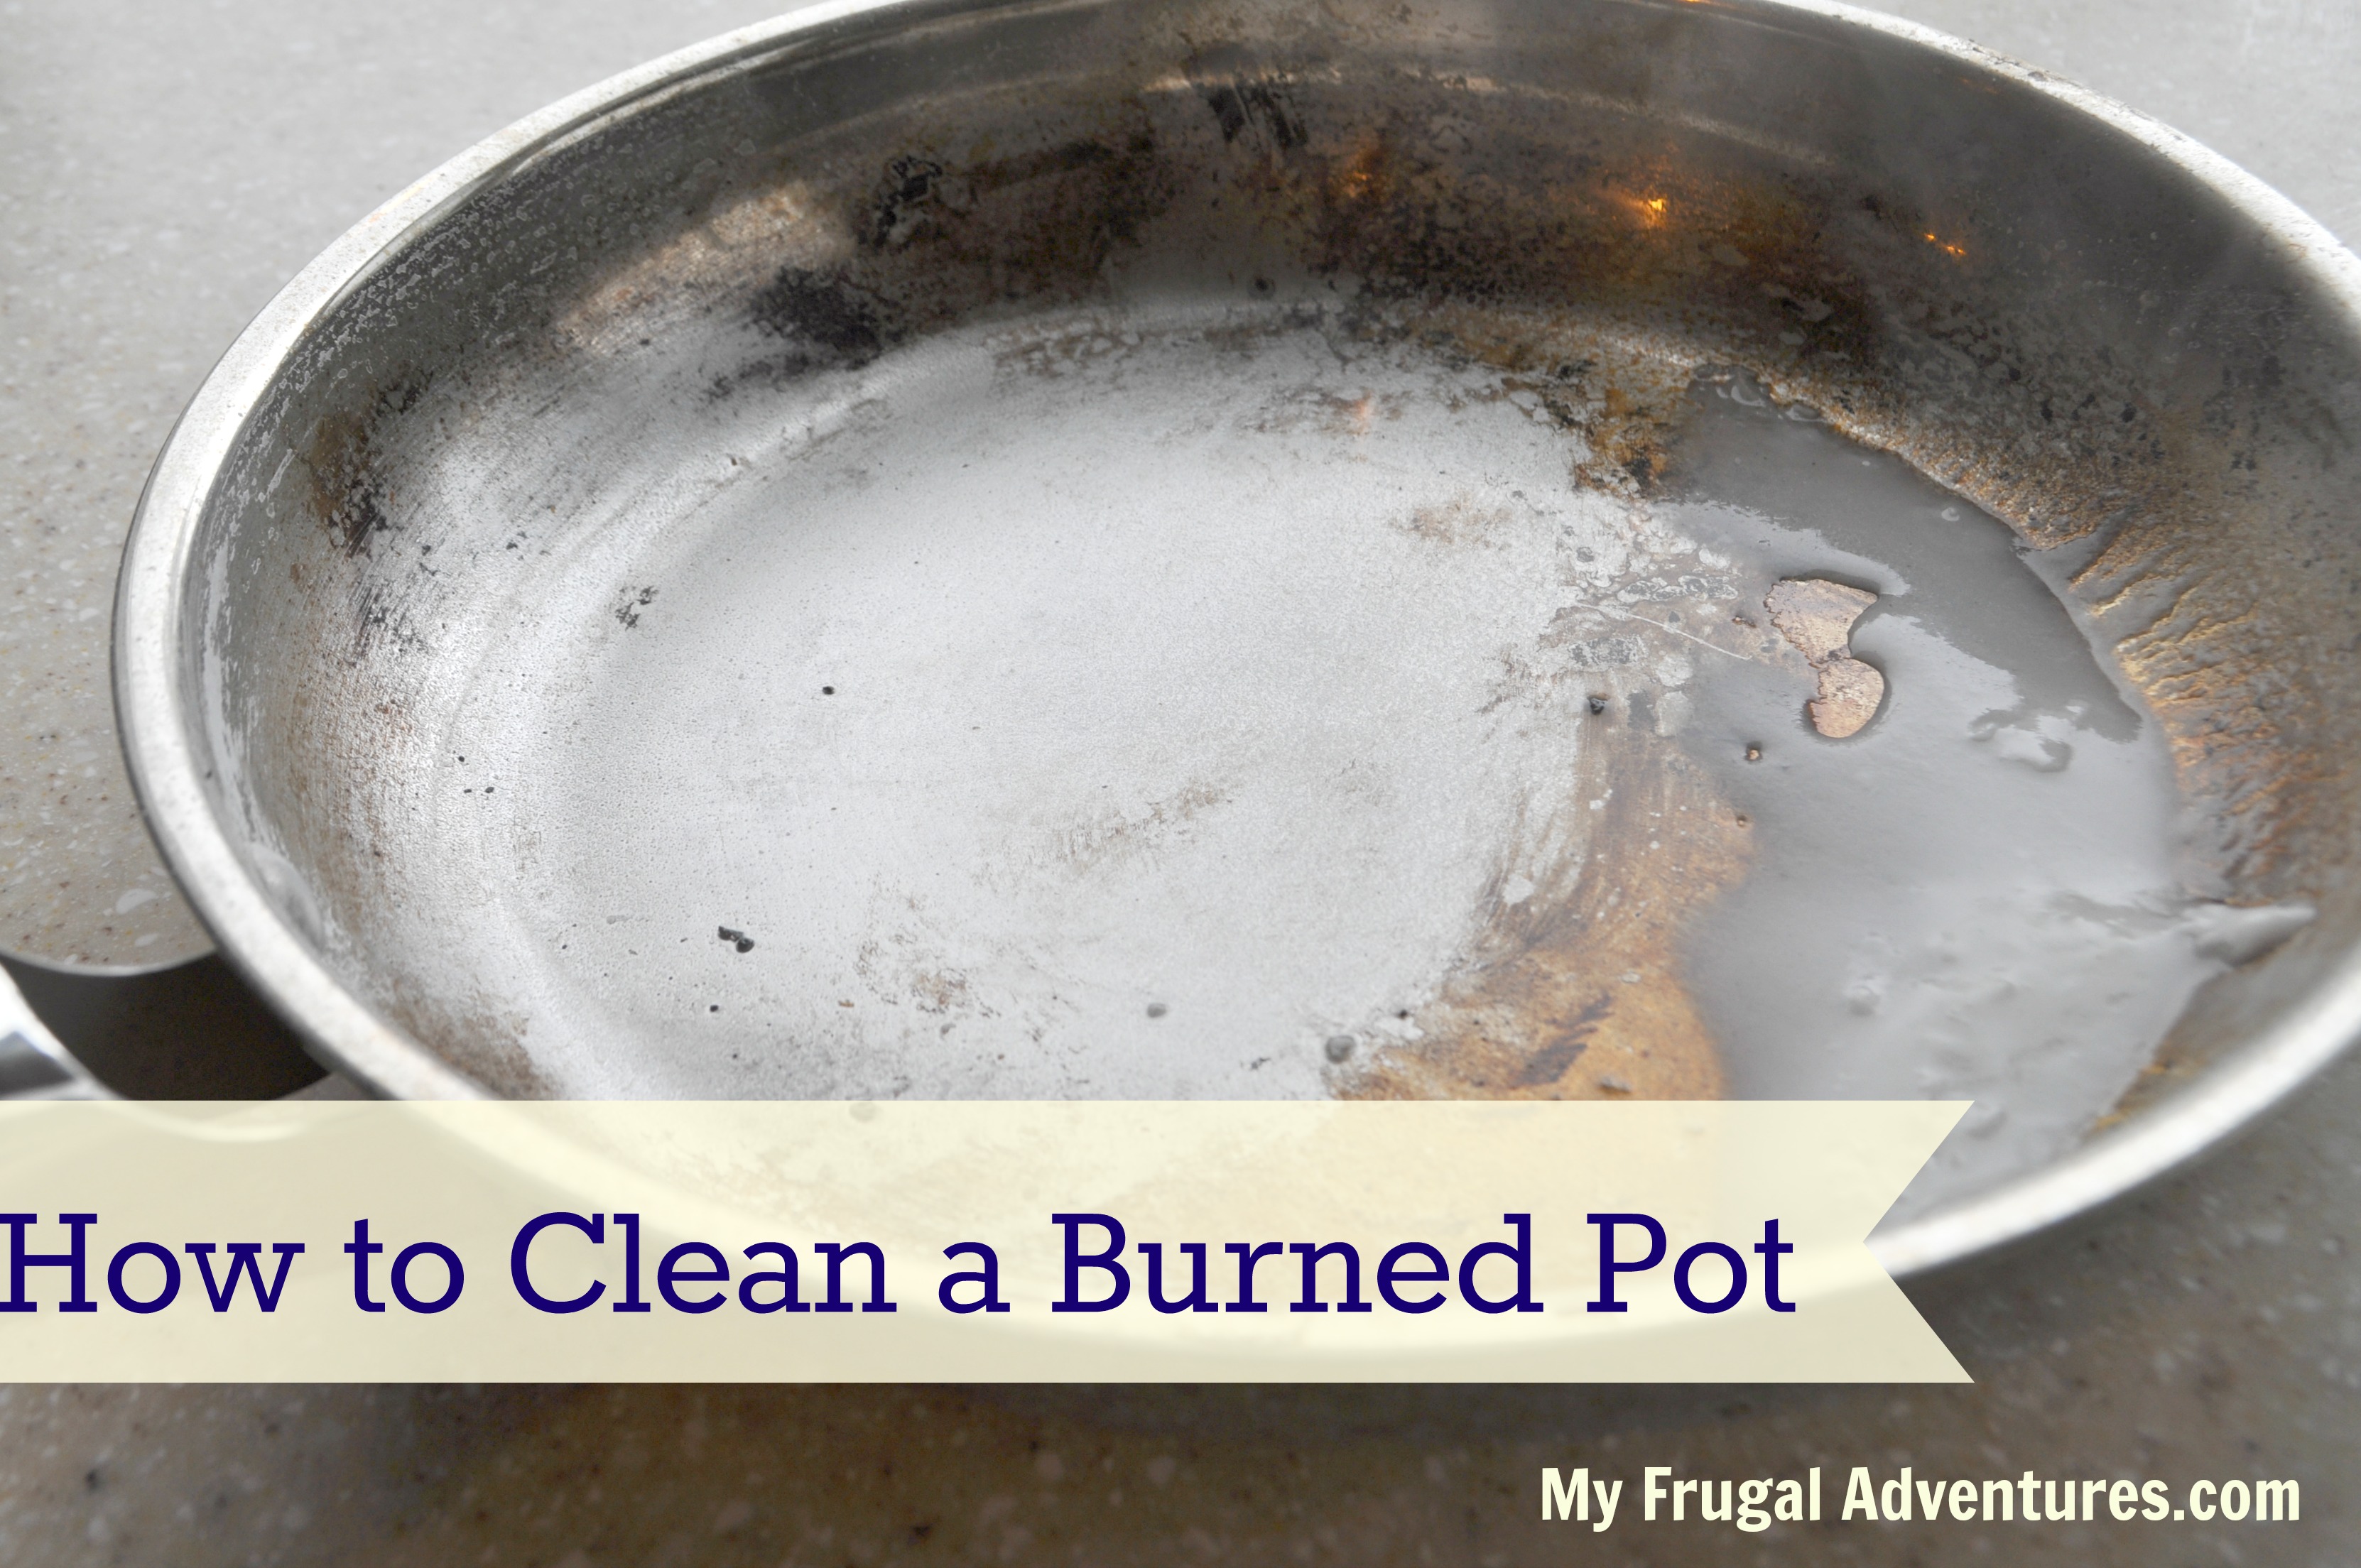 https://myfrugaladventures.com/wp-content/uploads/2013/03/how-to-clean-a-burned-pot-4.jpg